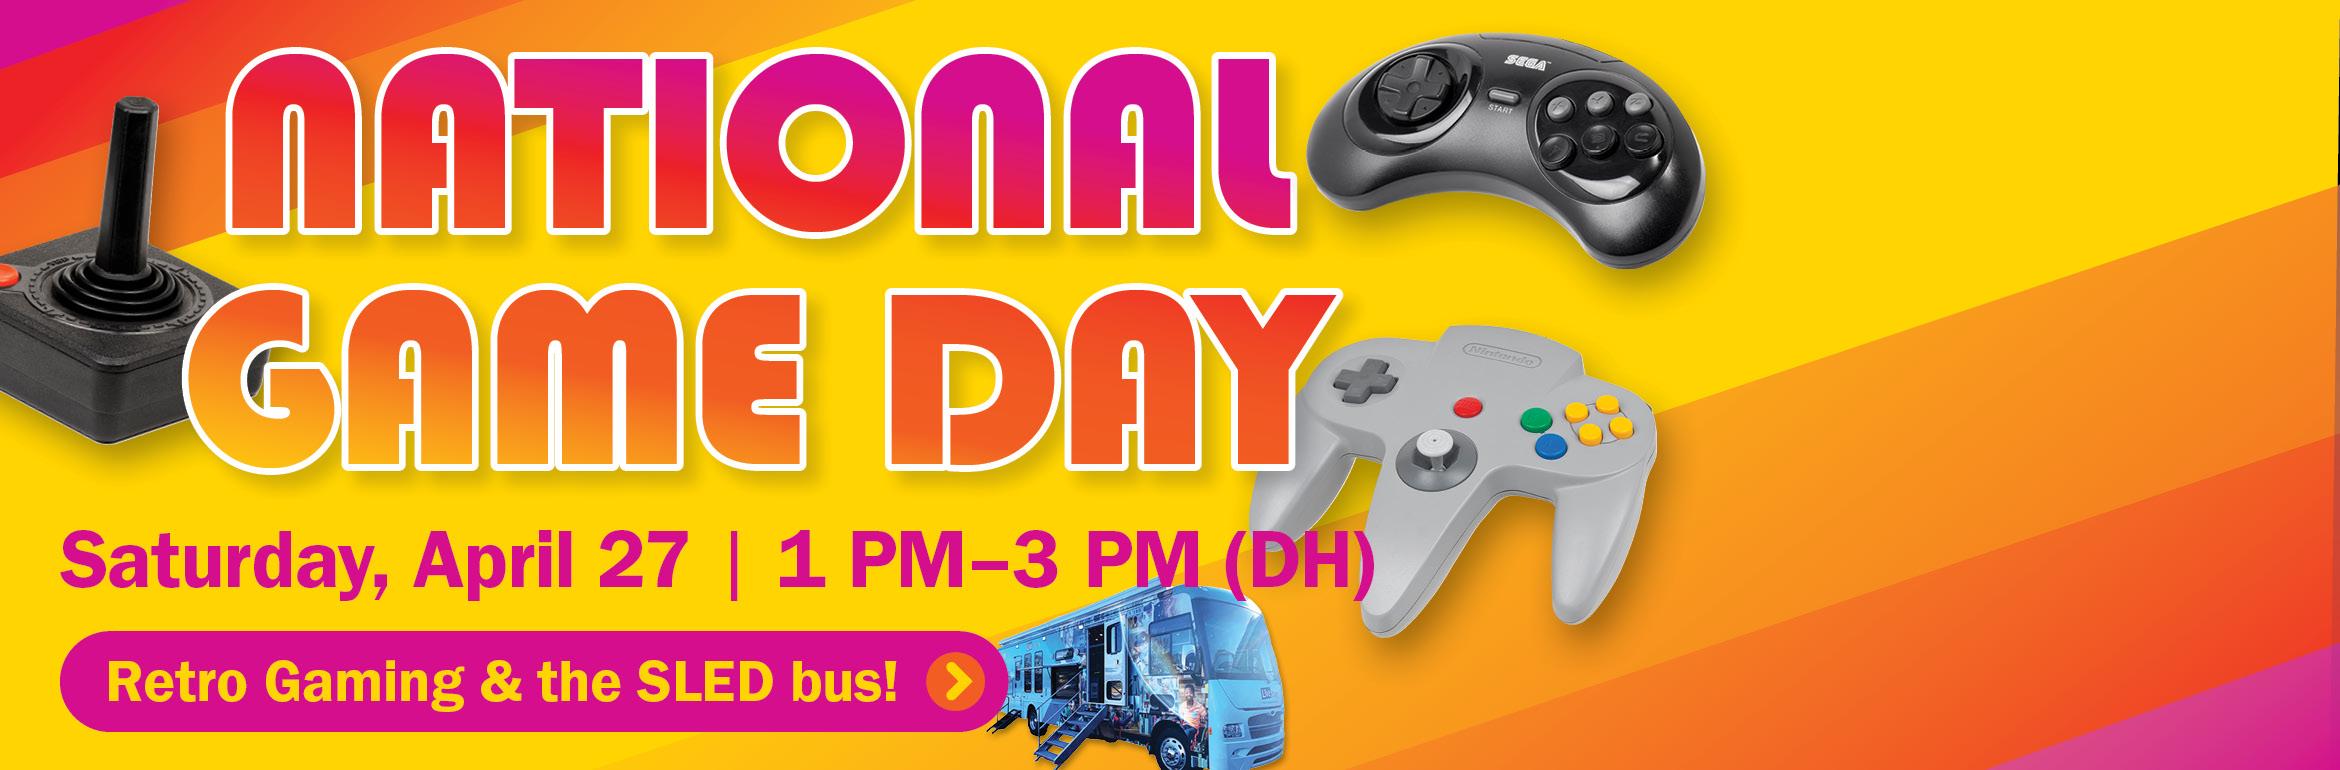 National Game Day. Saturday, April 27 | 1 PM–3 PM (DH). Retro Gaming & the SLED bus!